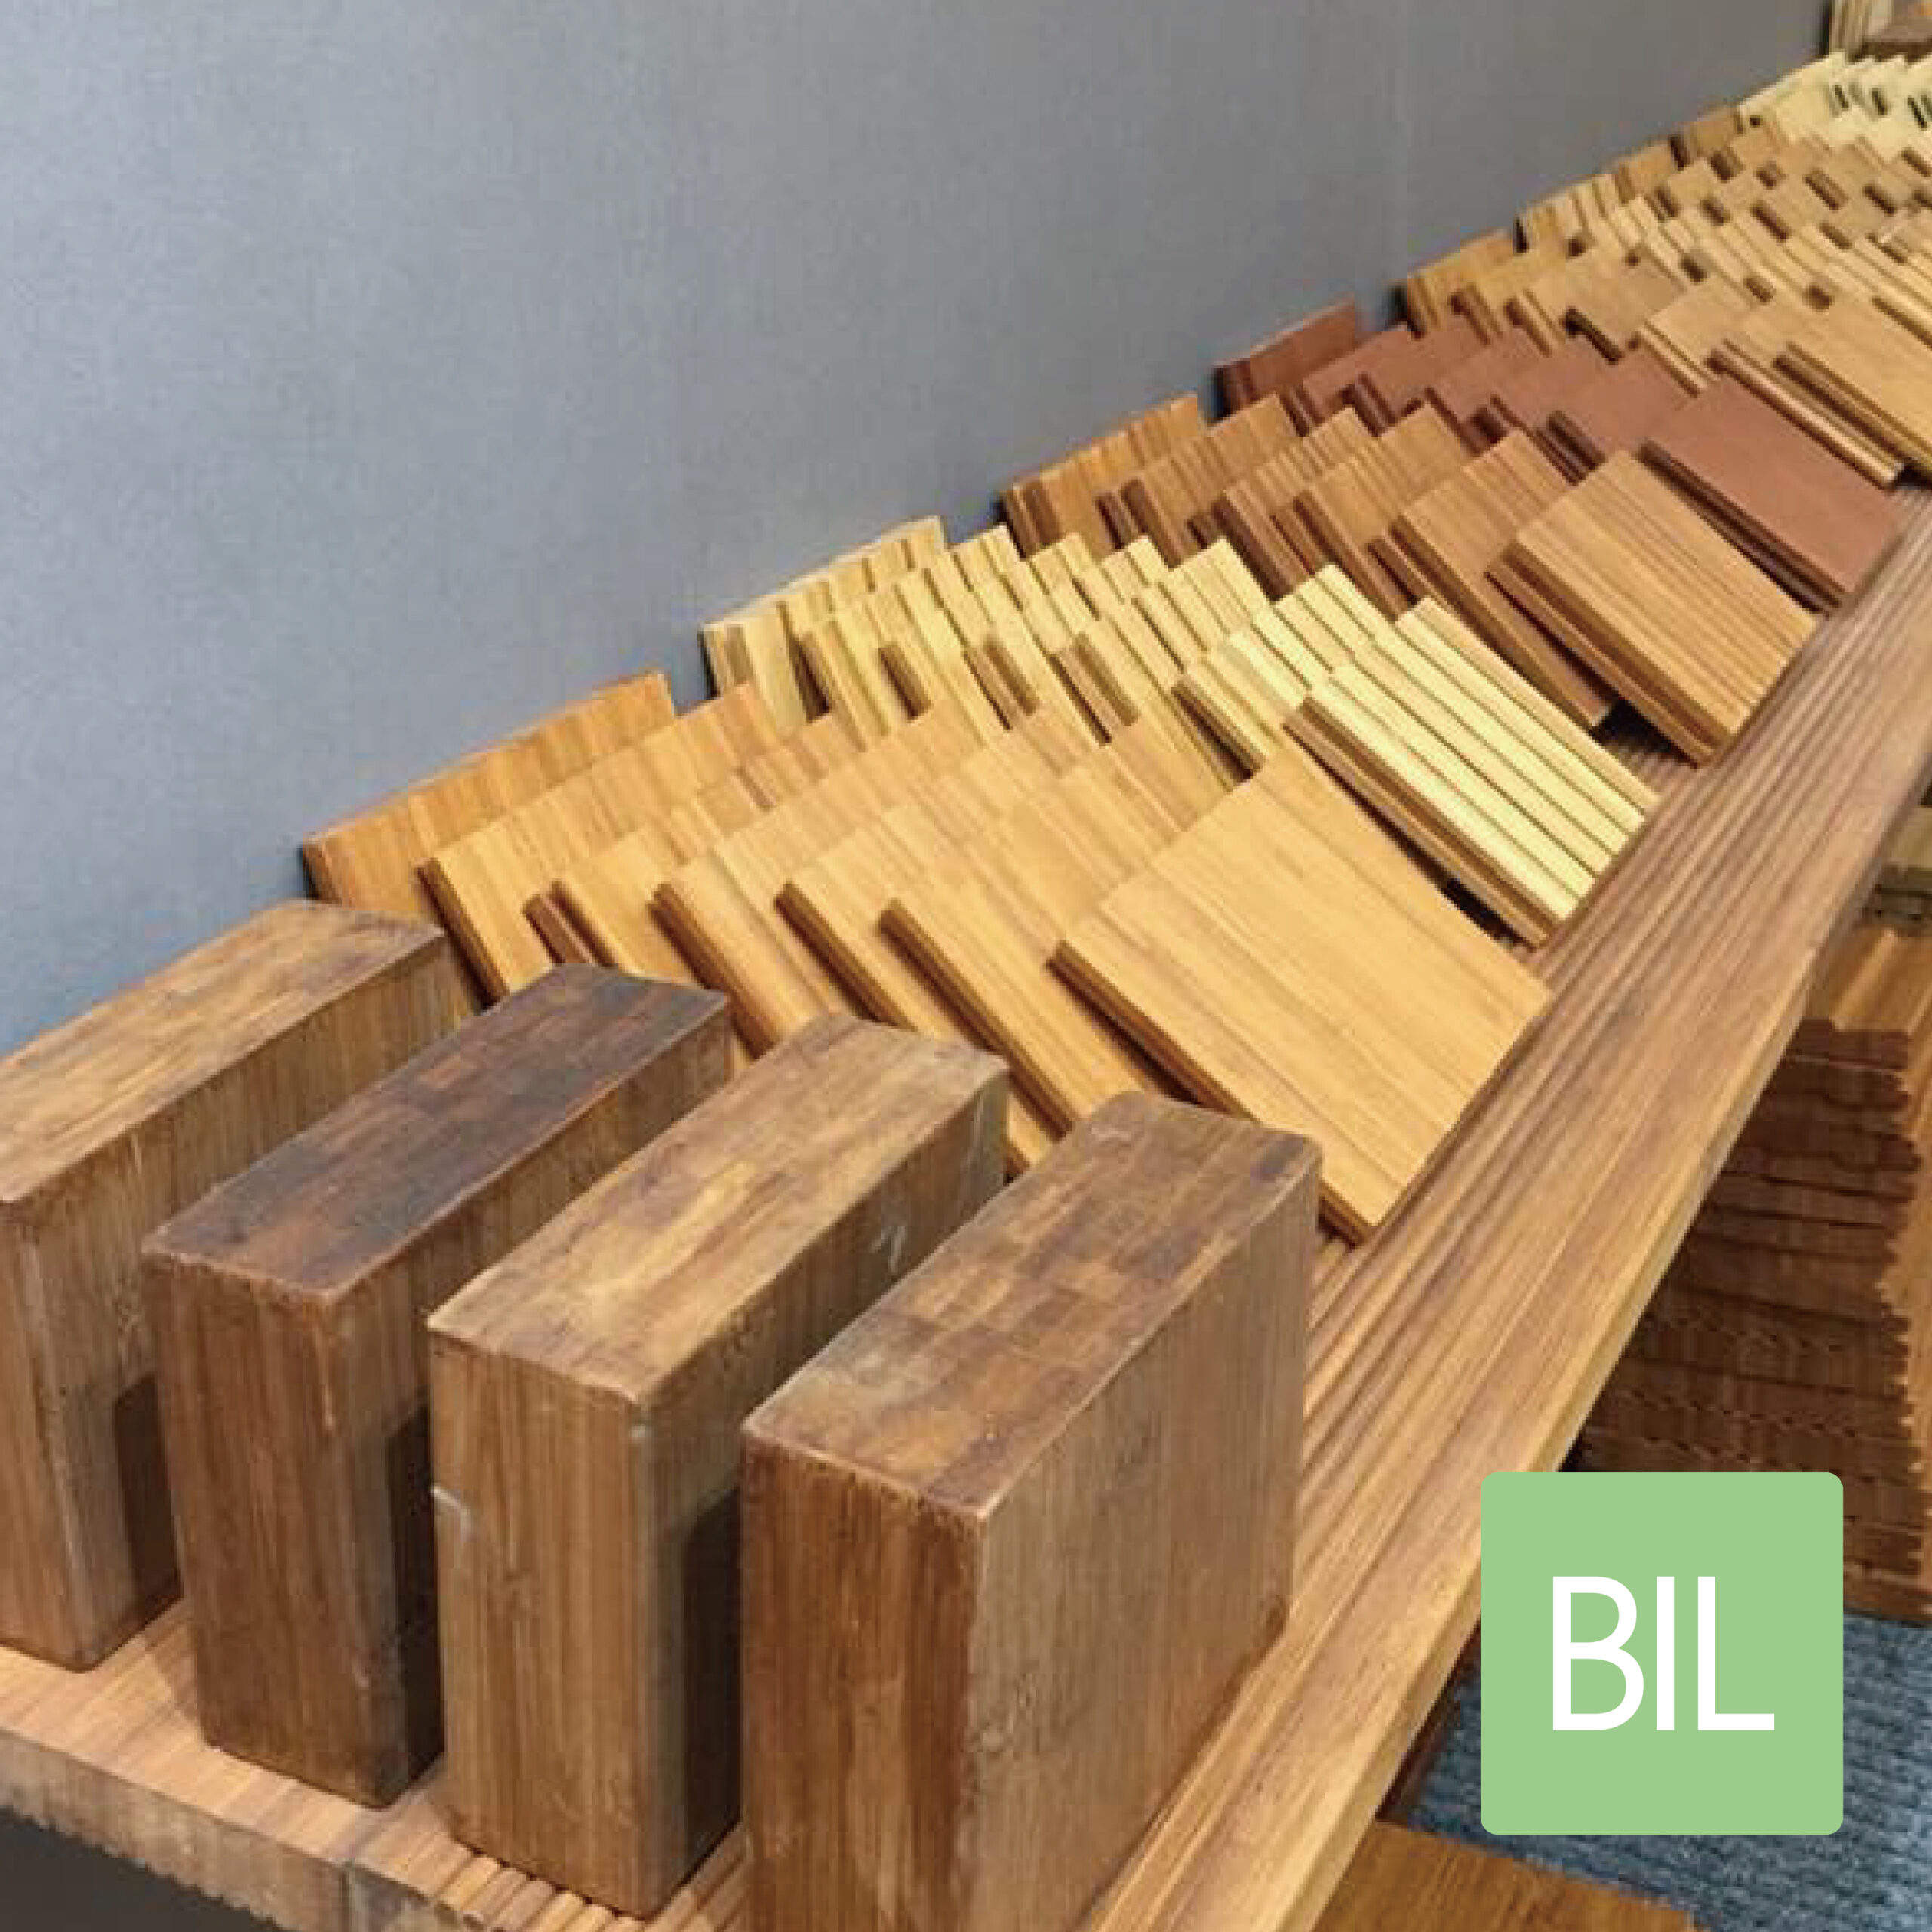 Embracing Change: Bamboo as the Sustainable Alternative to Plastic